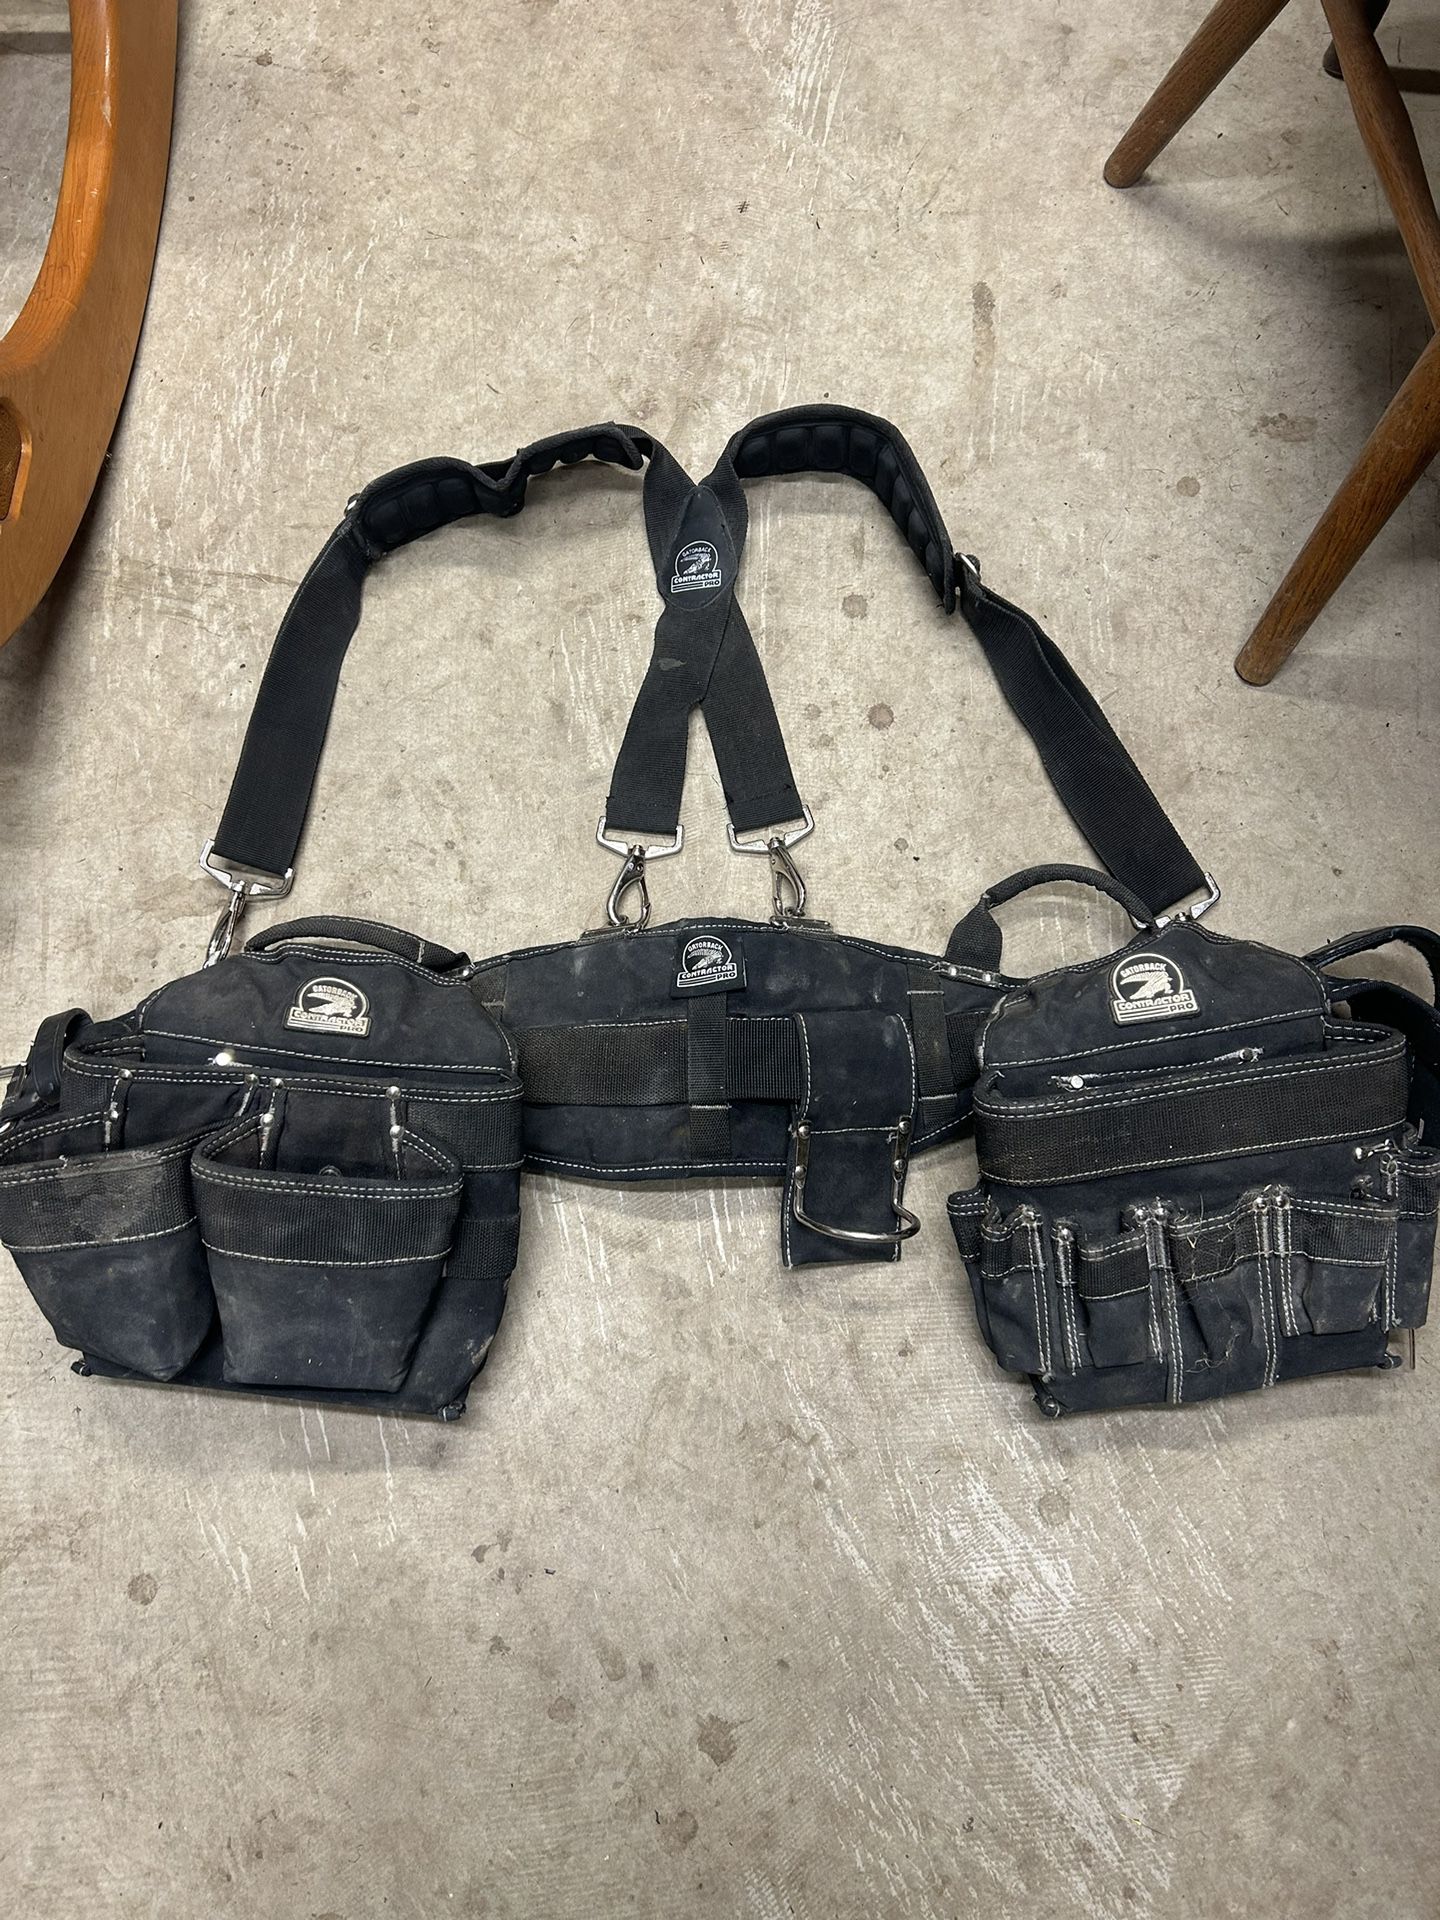 Tool Belt With Harness